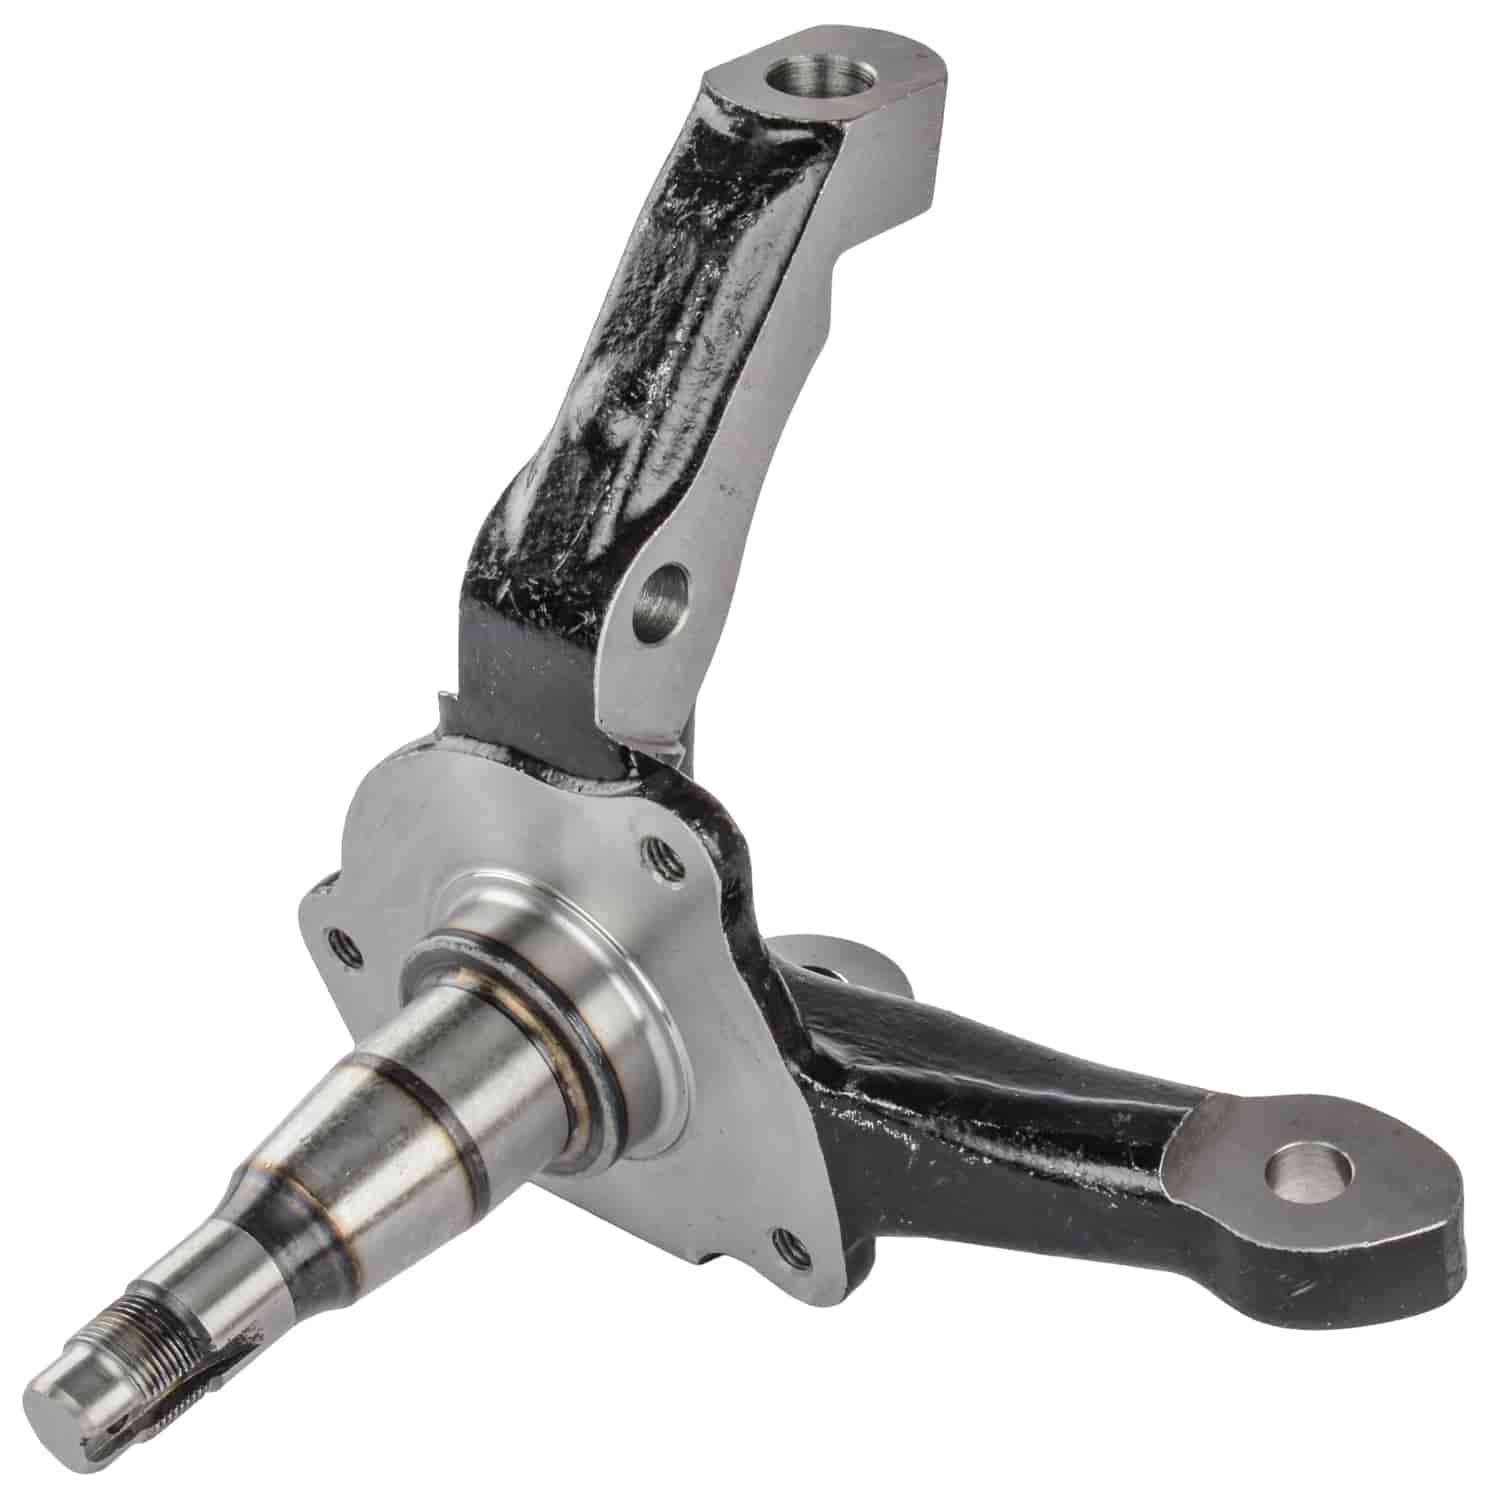 Disc Brake Spindles, Includes Extra Mounting Bolt-Hole [Stock Height]